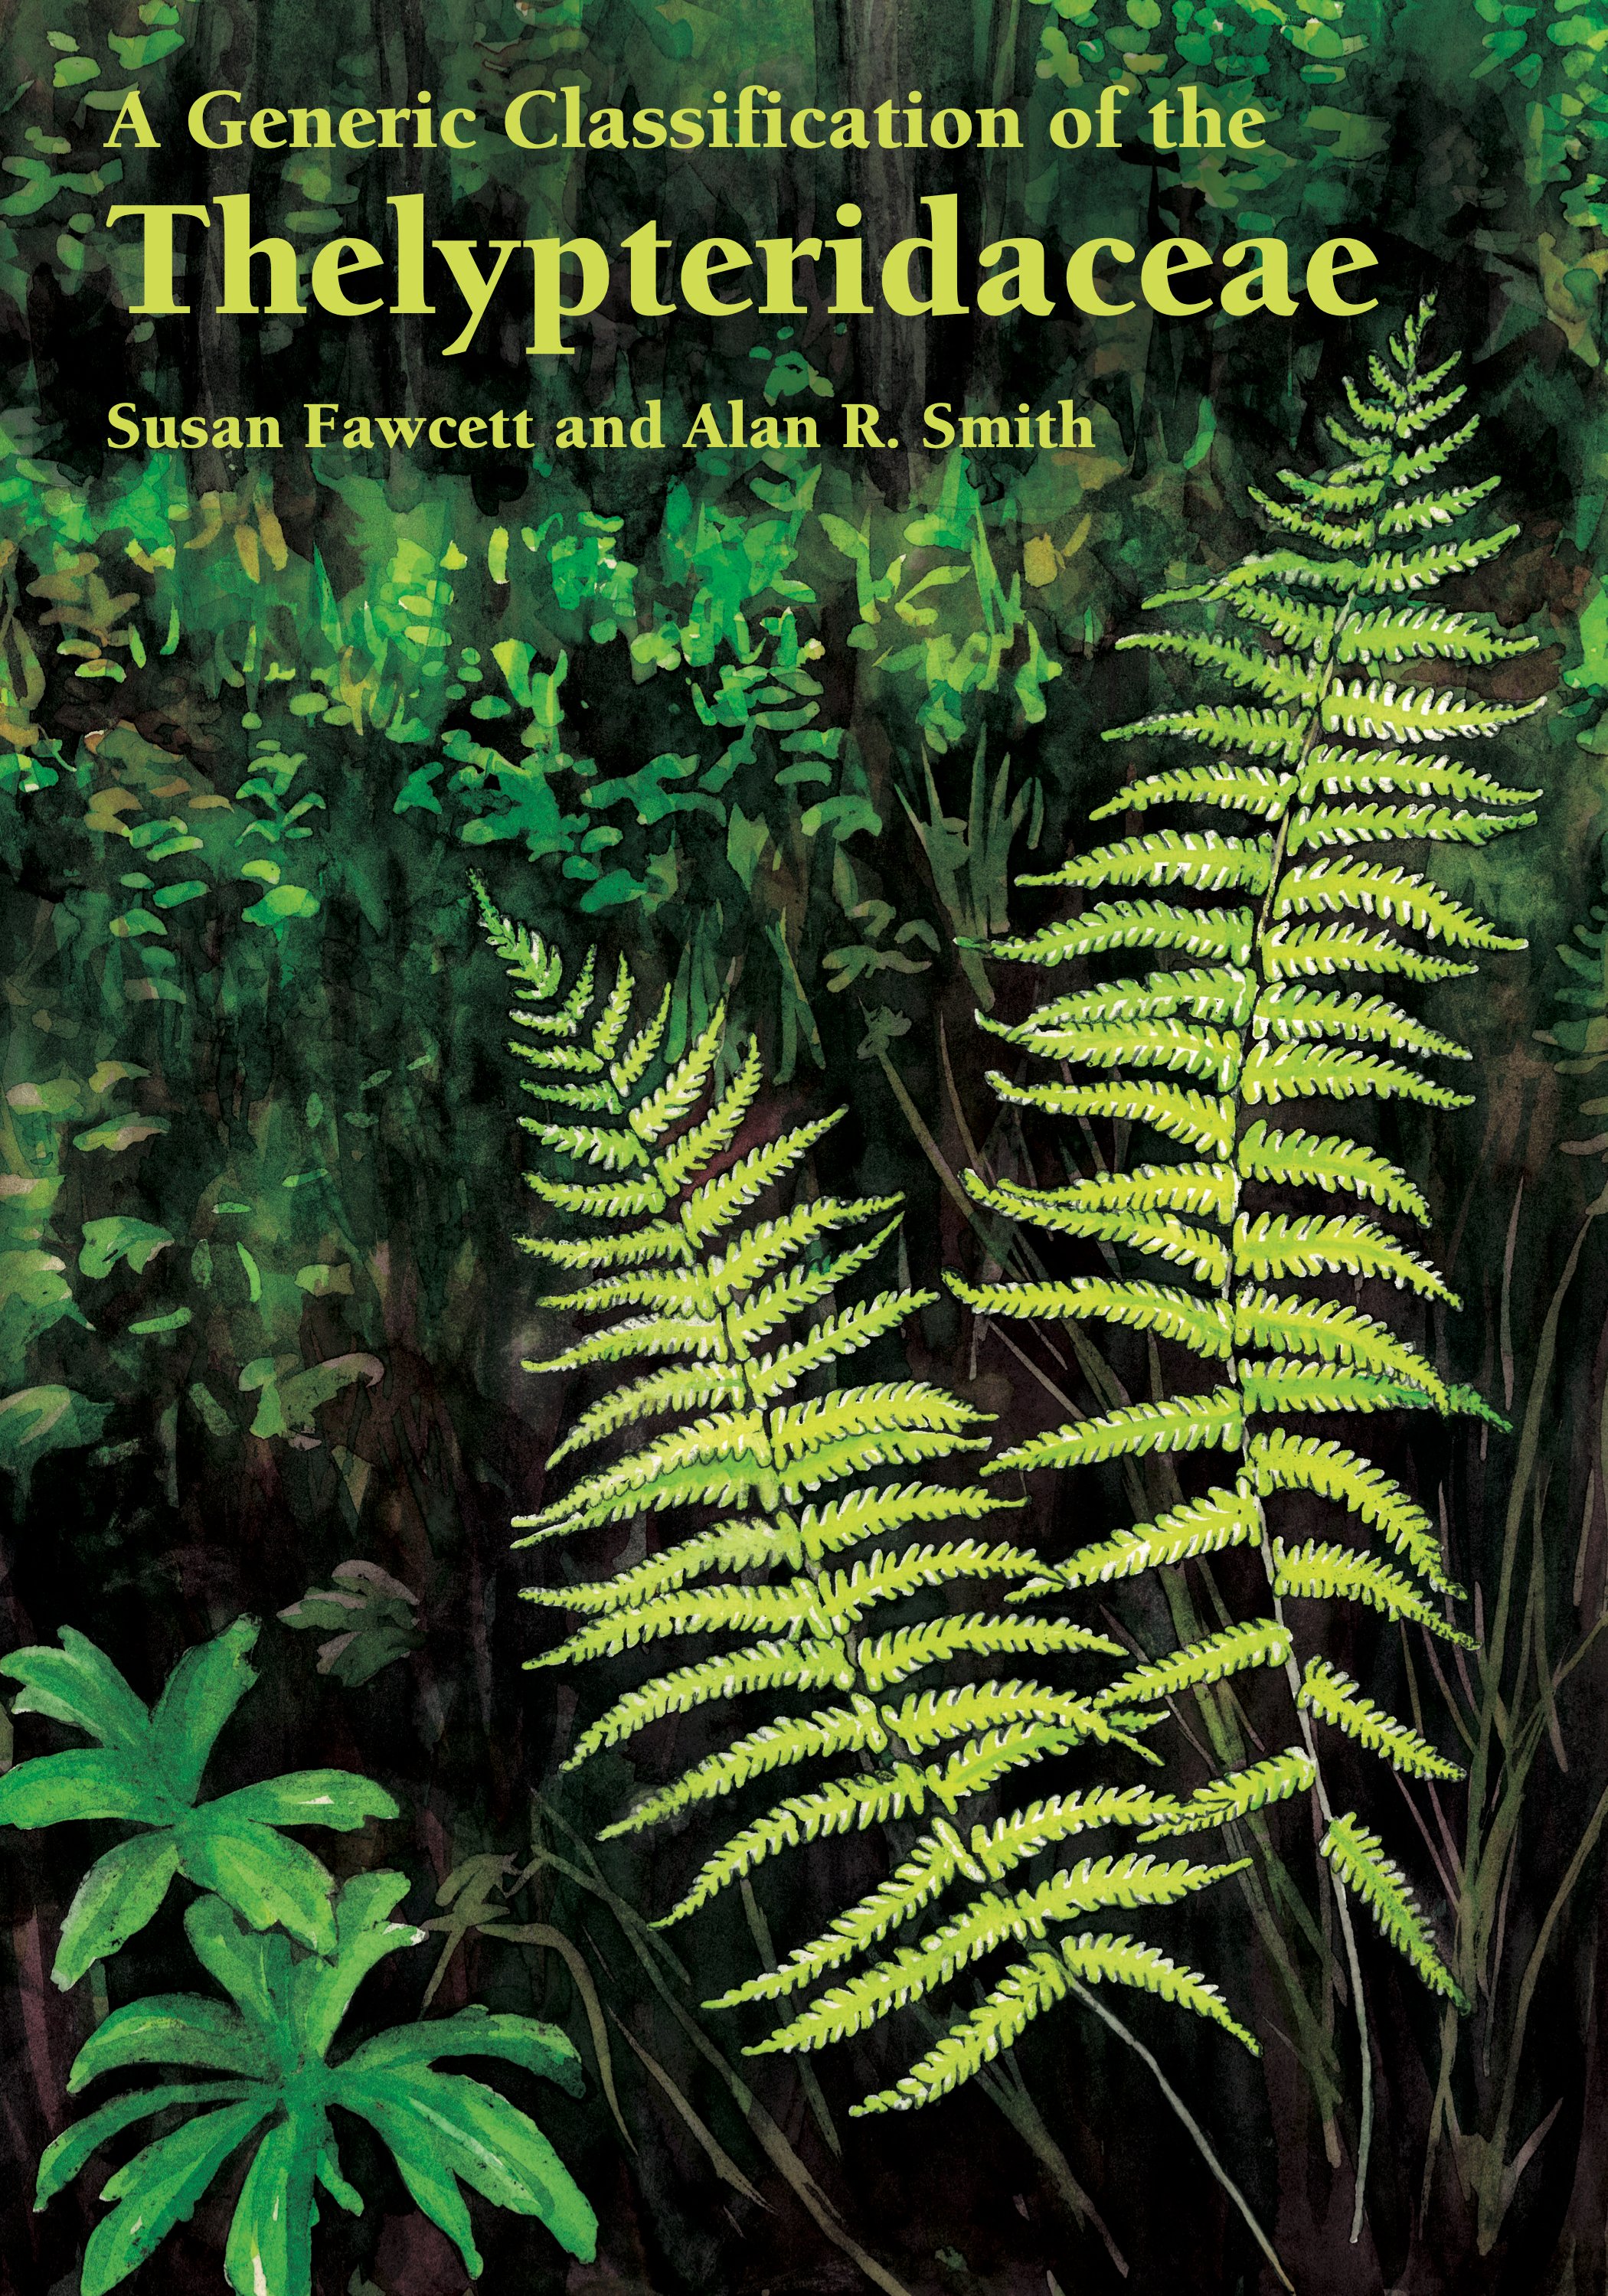 American Fern Society on Twitter: "A new generic classification of  Thelypteridaceae is now available! This incredible work by @fawcett_susan  and Alan Smith can be downloaded for free here: https://t.co/oxenU0EWiK  Hardcover copies are